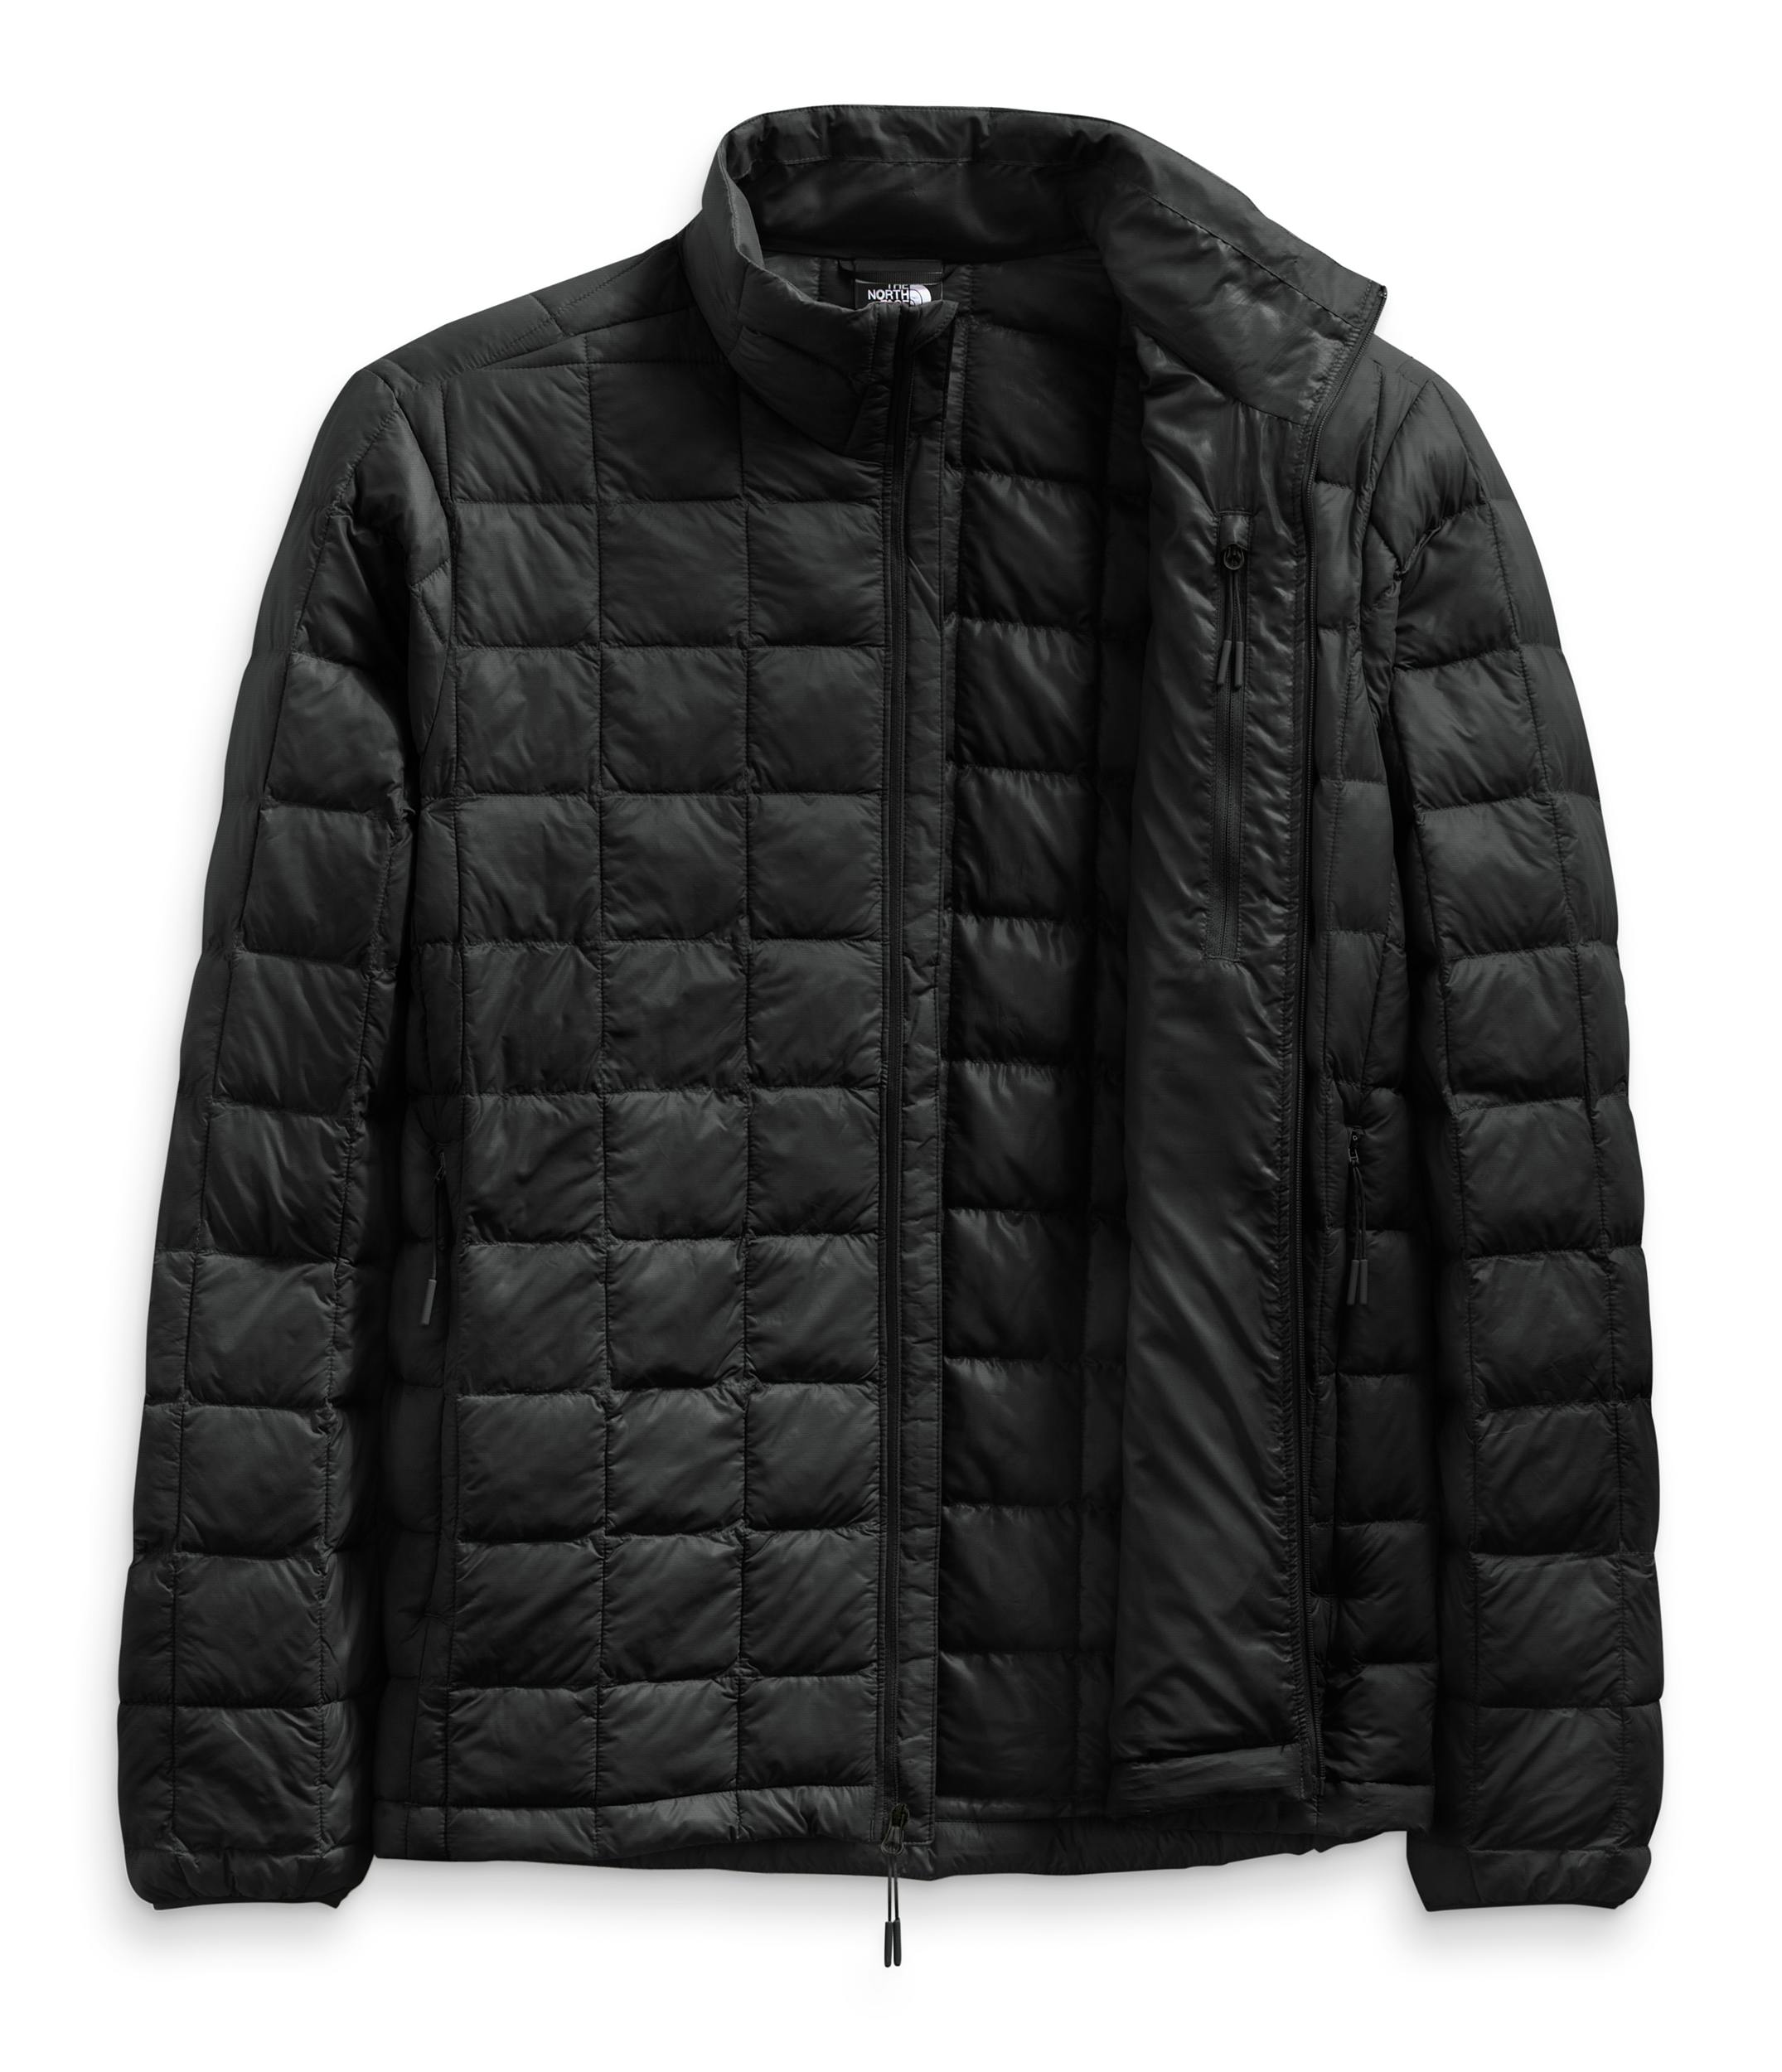 The North Face Men's ThermoBall™ Eco Insulated Jacket